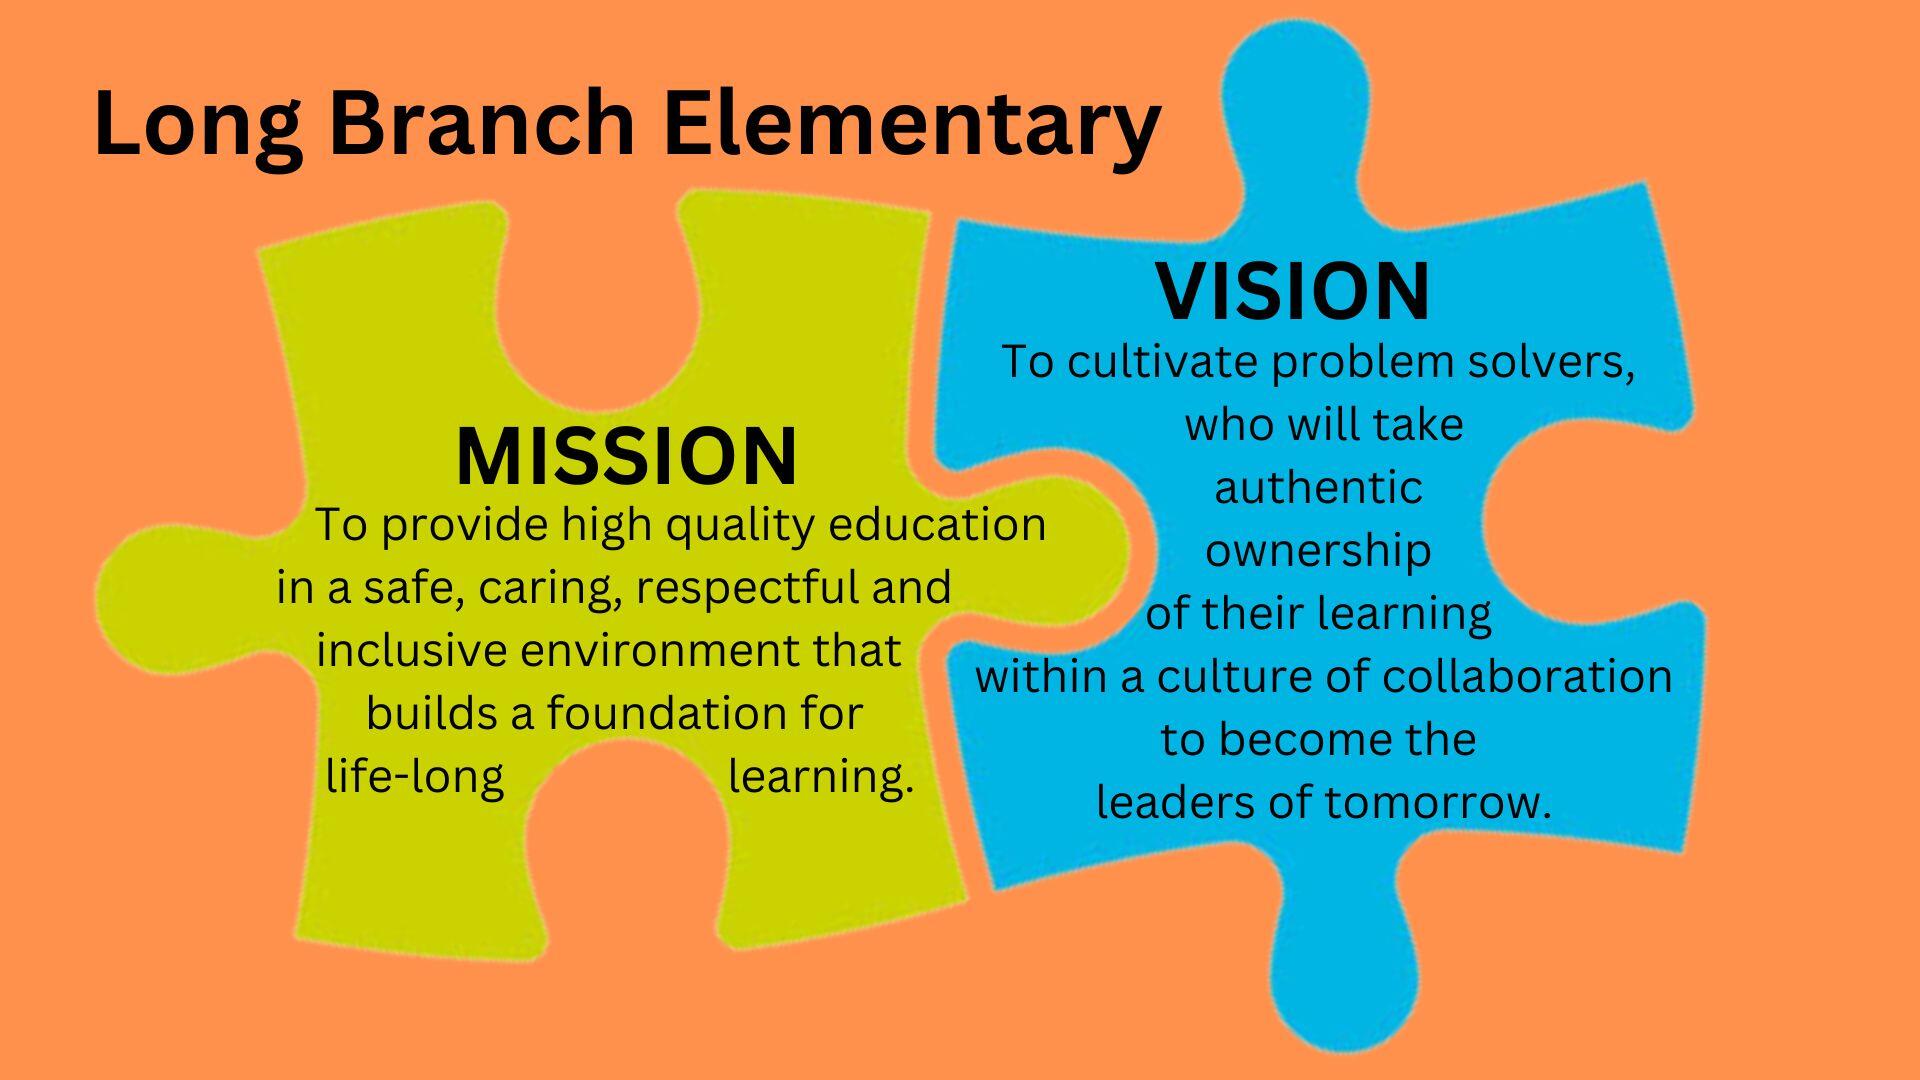 Long Branch Elementary Mission and Vision Statement